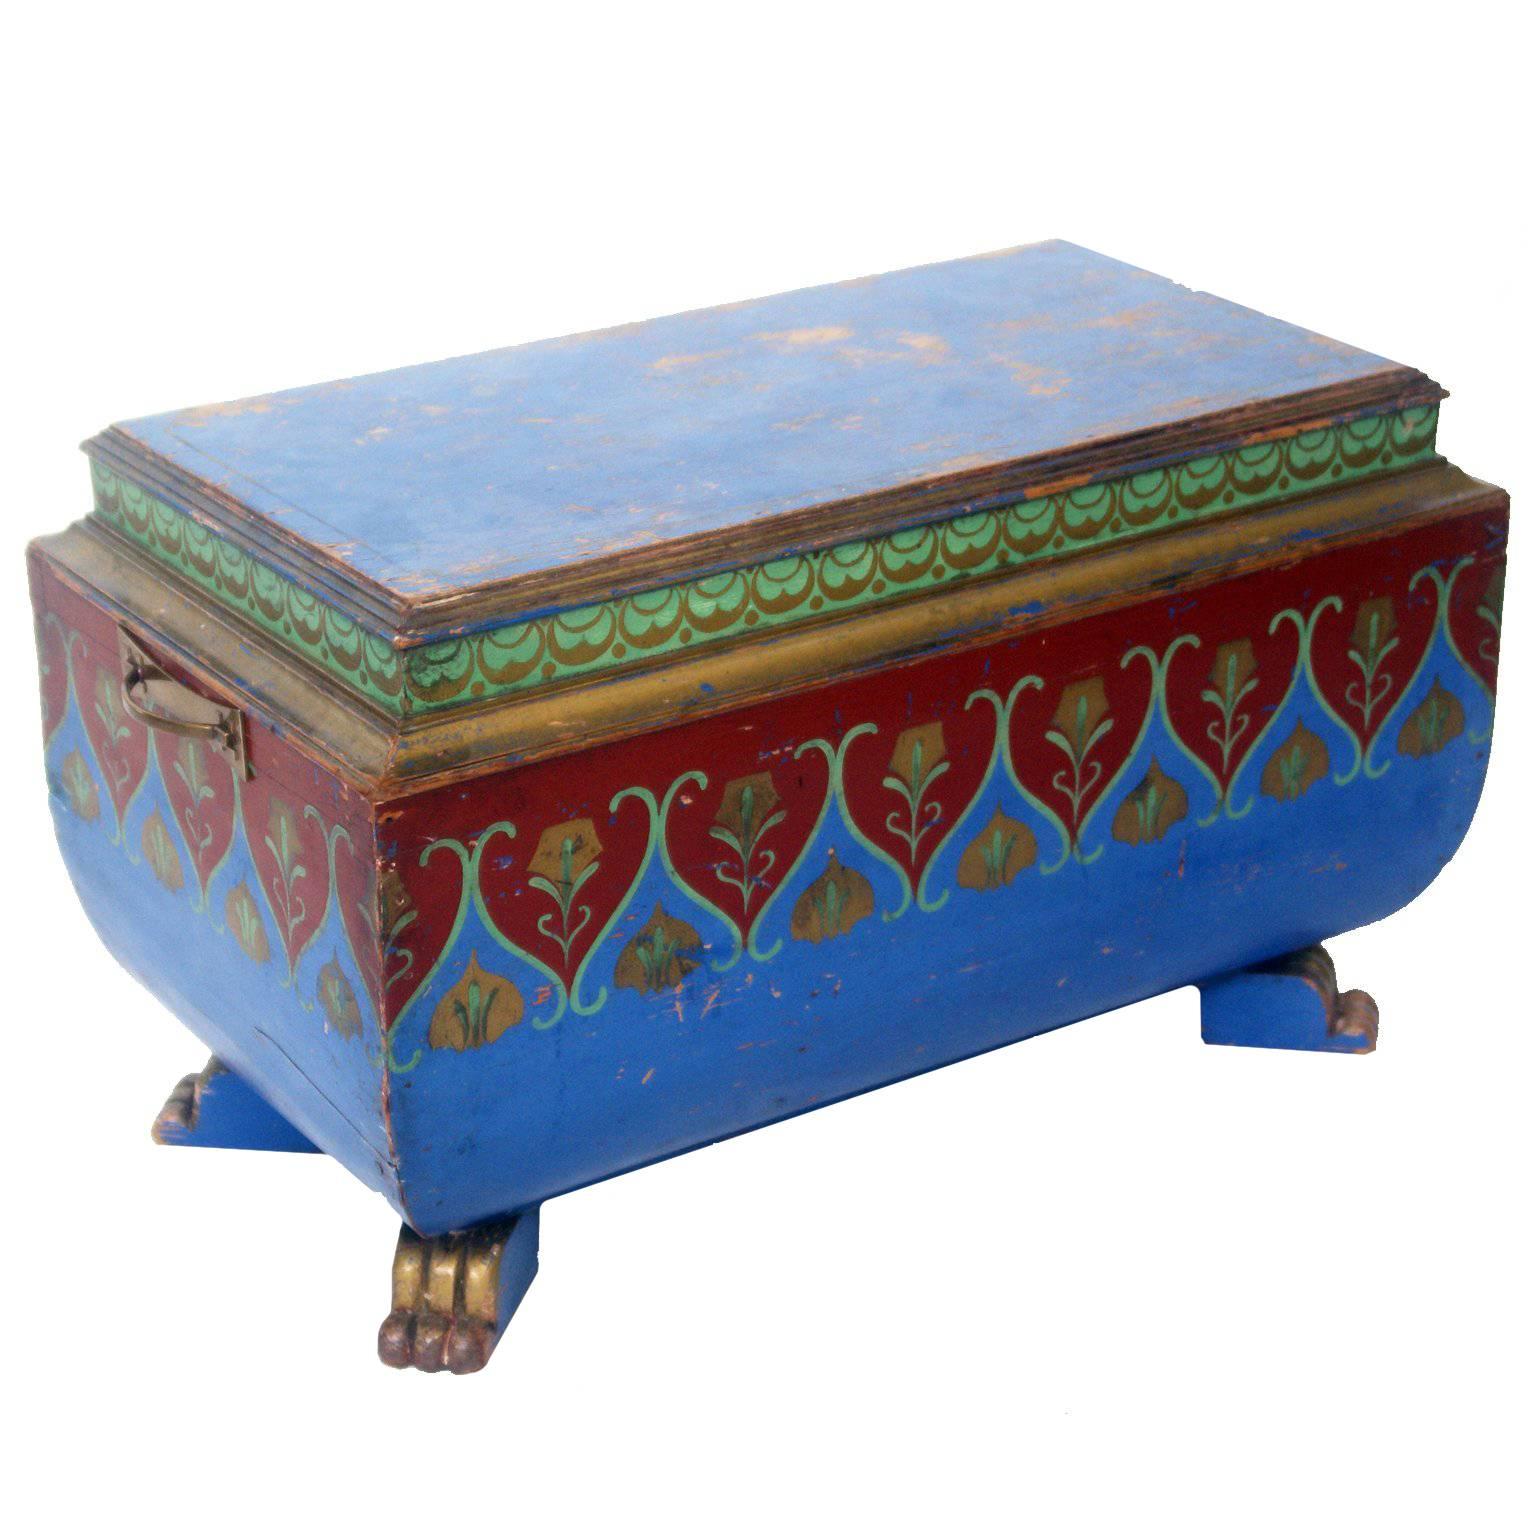 Painted Sarcophagus Side Table or Footstool